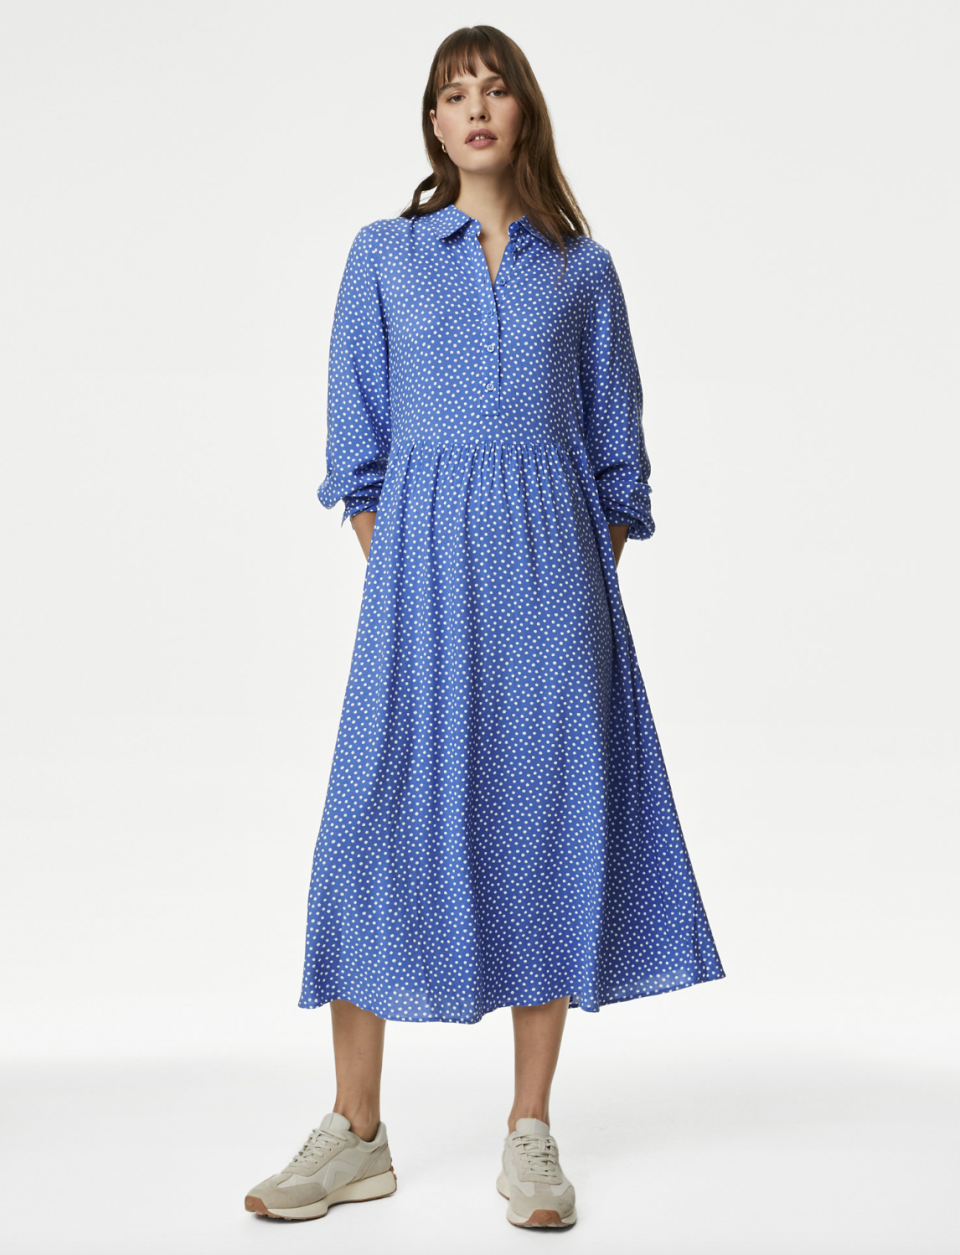 This blue polka-dot style is one of two new additional prints introduced by M&S. (Marks & Spencer)